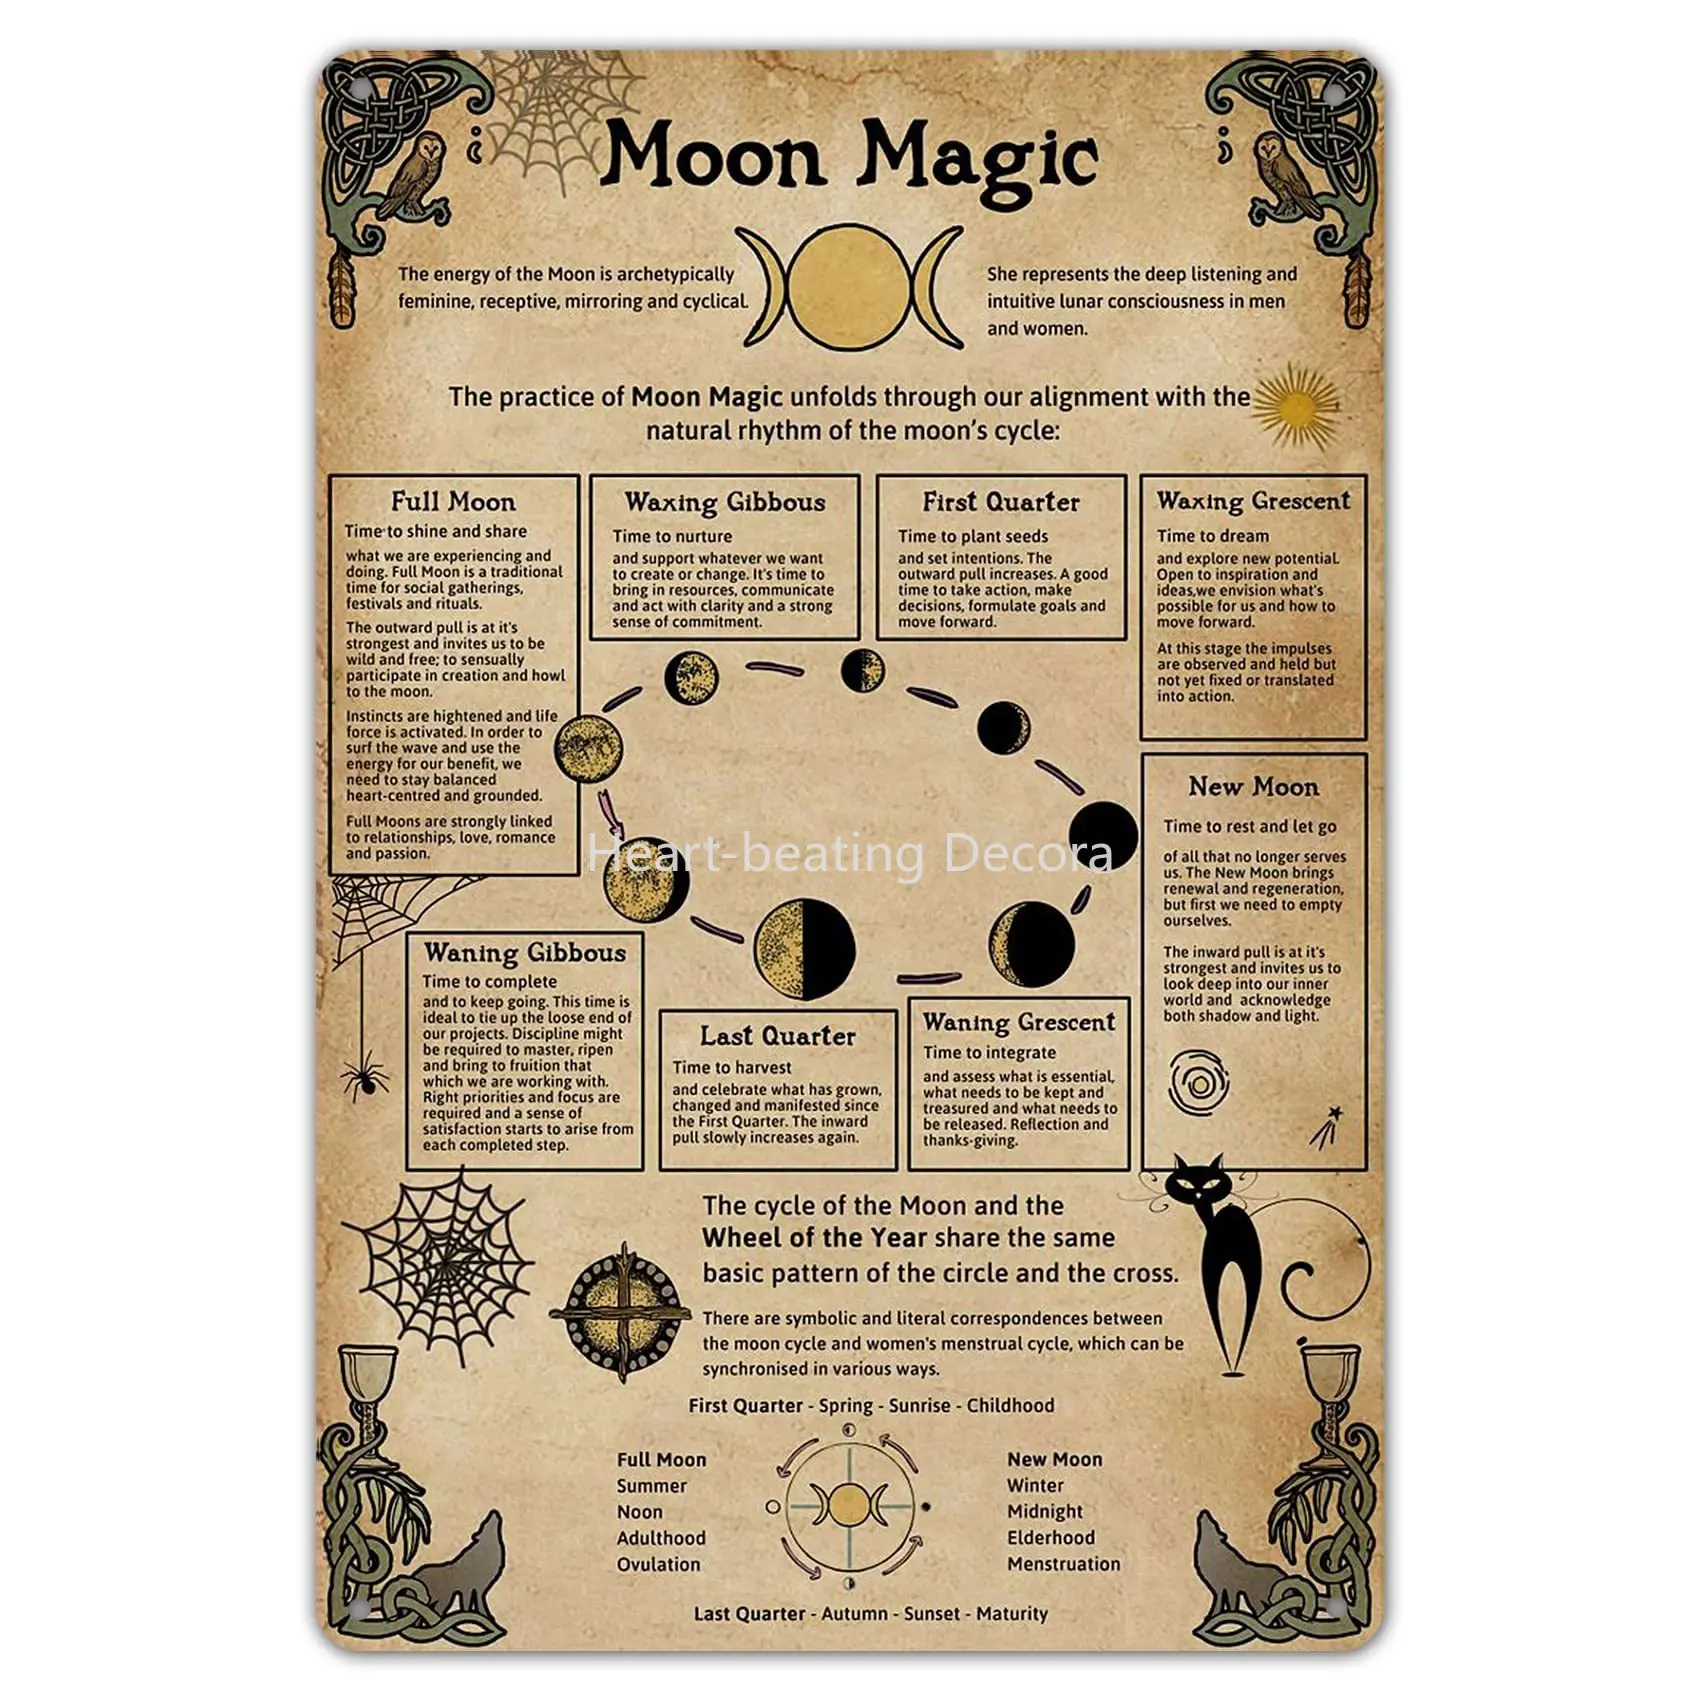 Moon Magic Knowledge Metal Tin Planning Infographic Poster Plaque for School Education Club Home Wall Decor Wall Decor Metal art plaque wall open metal tin signs painting poster gas station pub club garage home wall decor